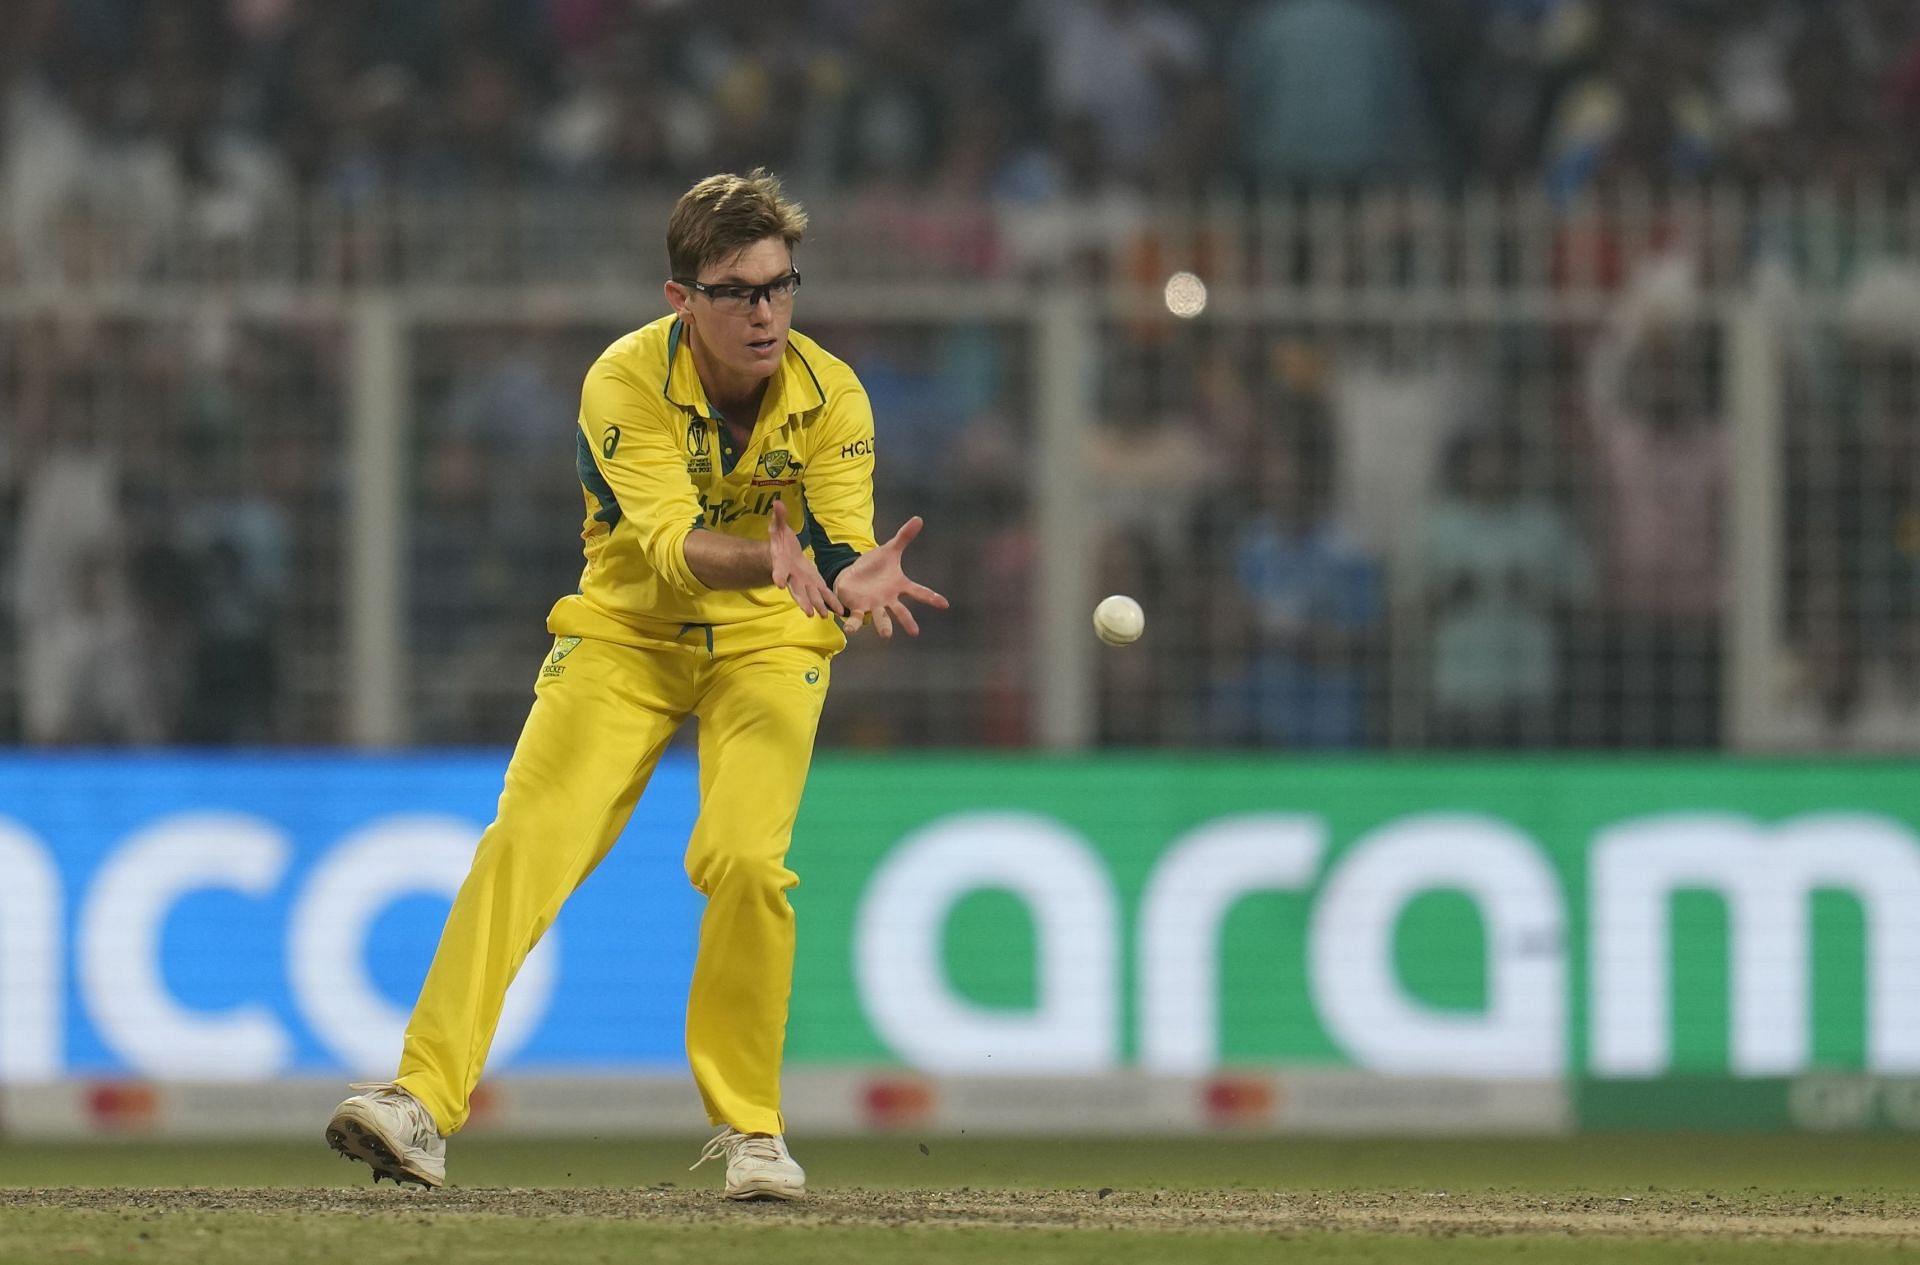 Adam Zampa has 22 wickets from 10 games. (Pic: AP)